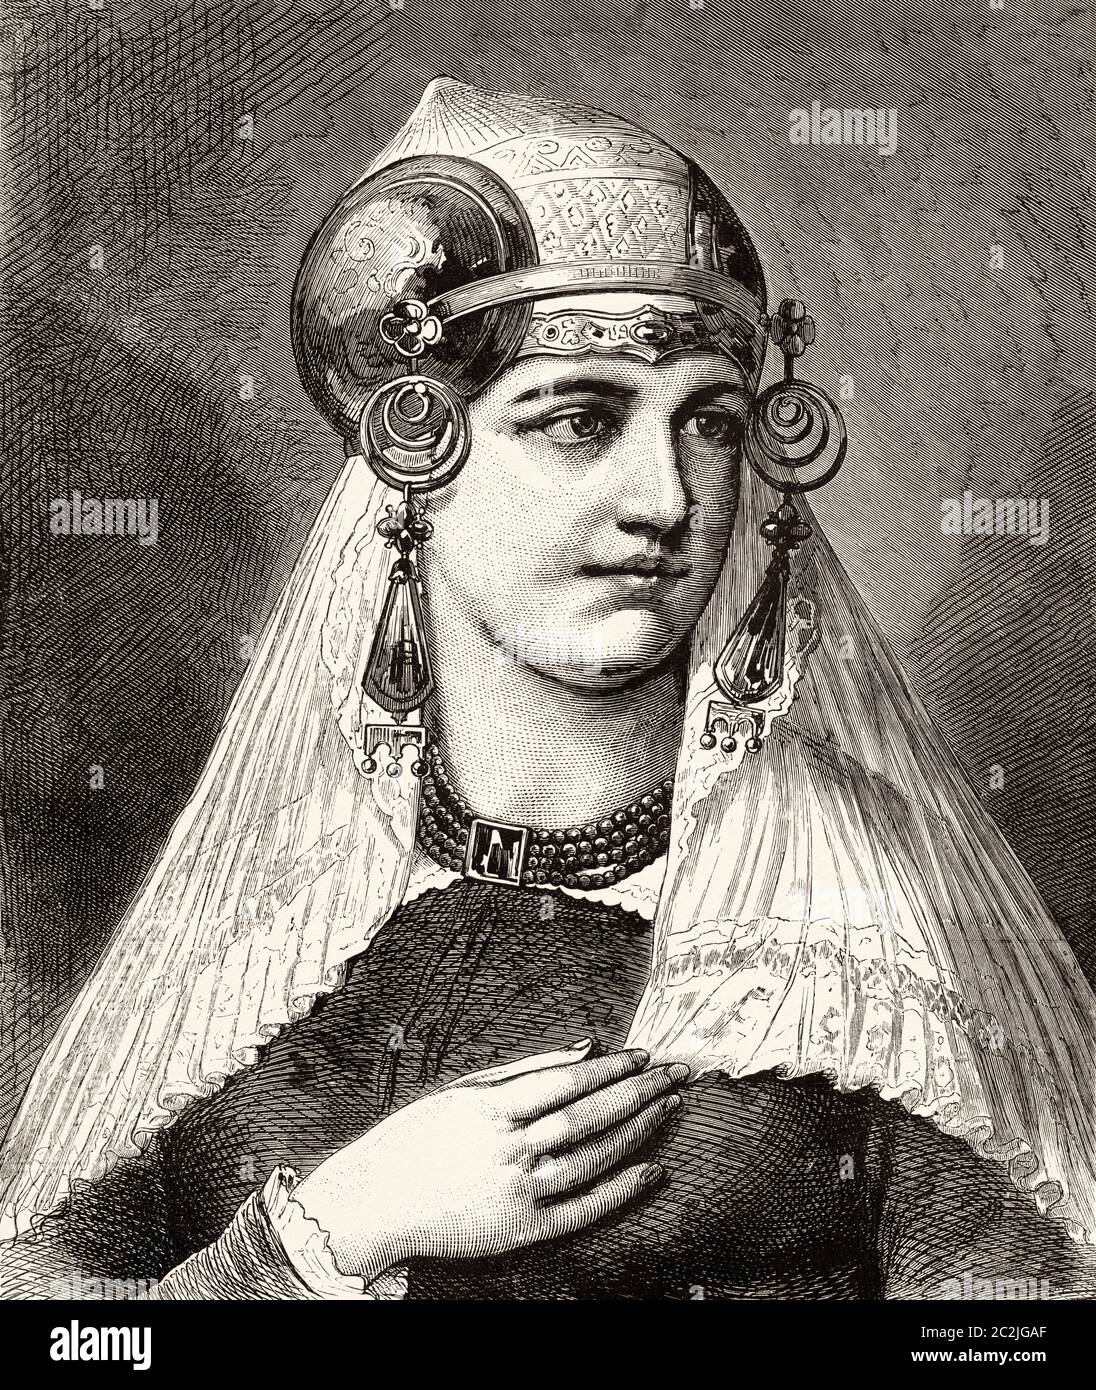 19th century woman dressed in the traditional clothing and ornaments of the dutch city of Vlaardingen The Netherlands. Old 19th century engraved illustration, El Mundo Ilustrado 1880 Stock Photo